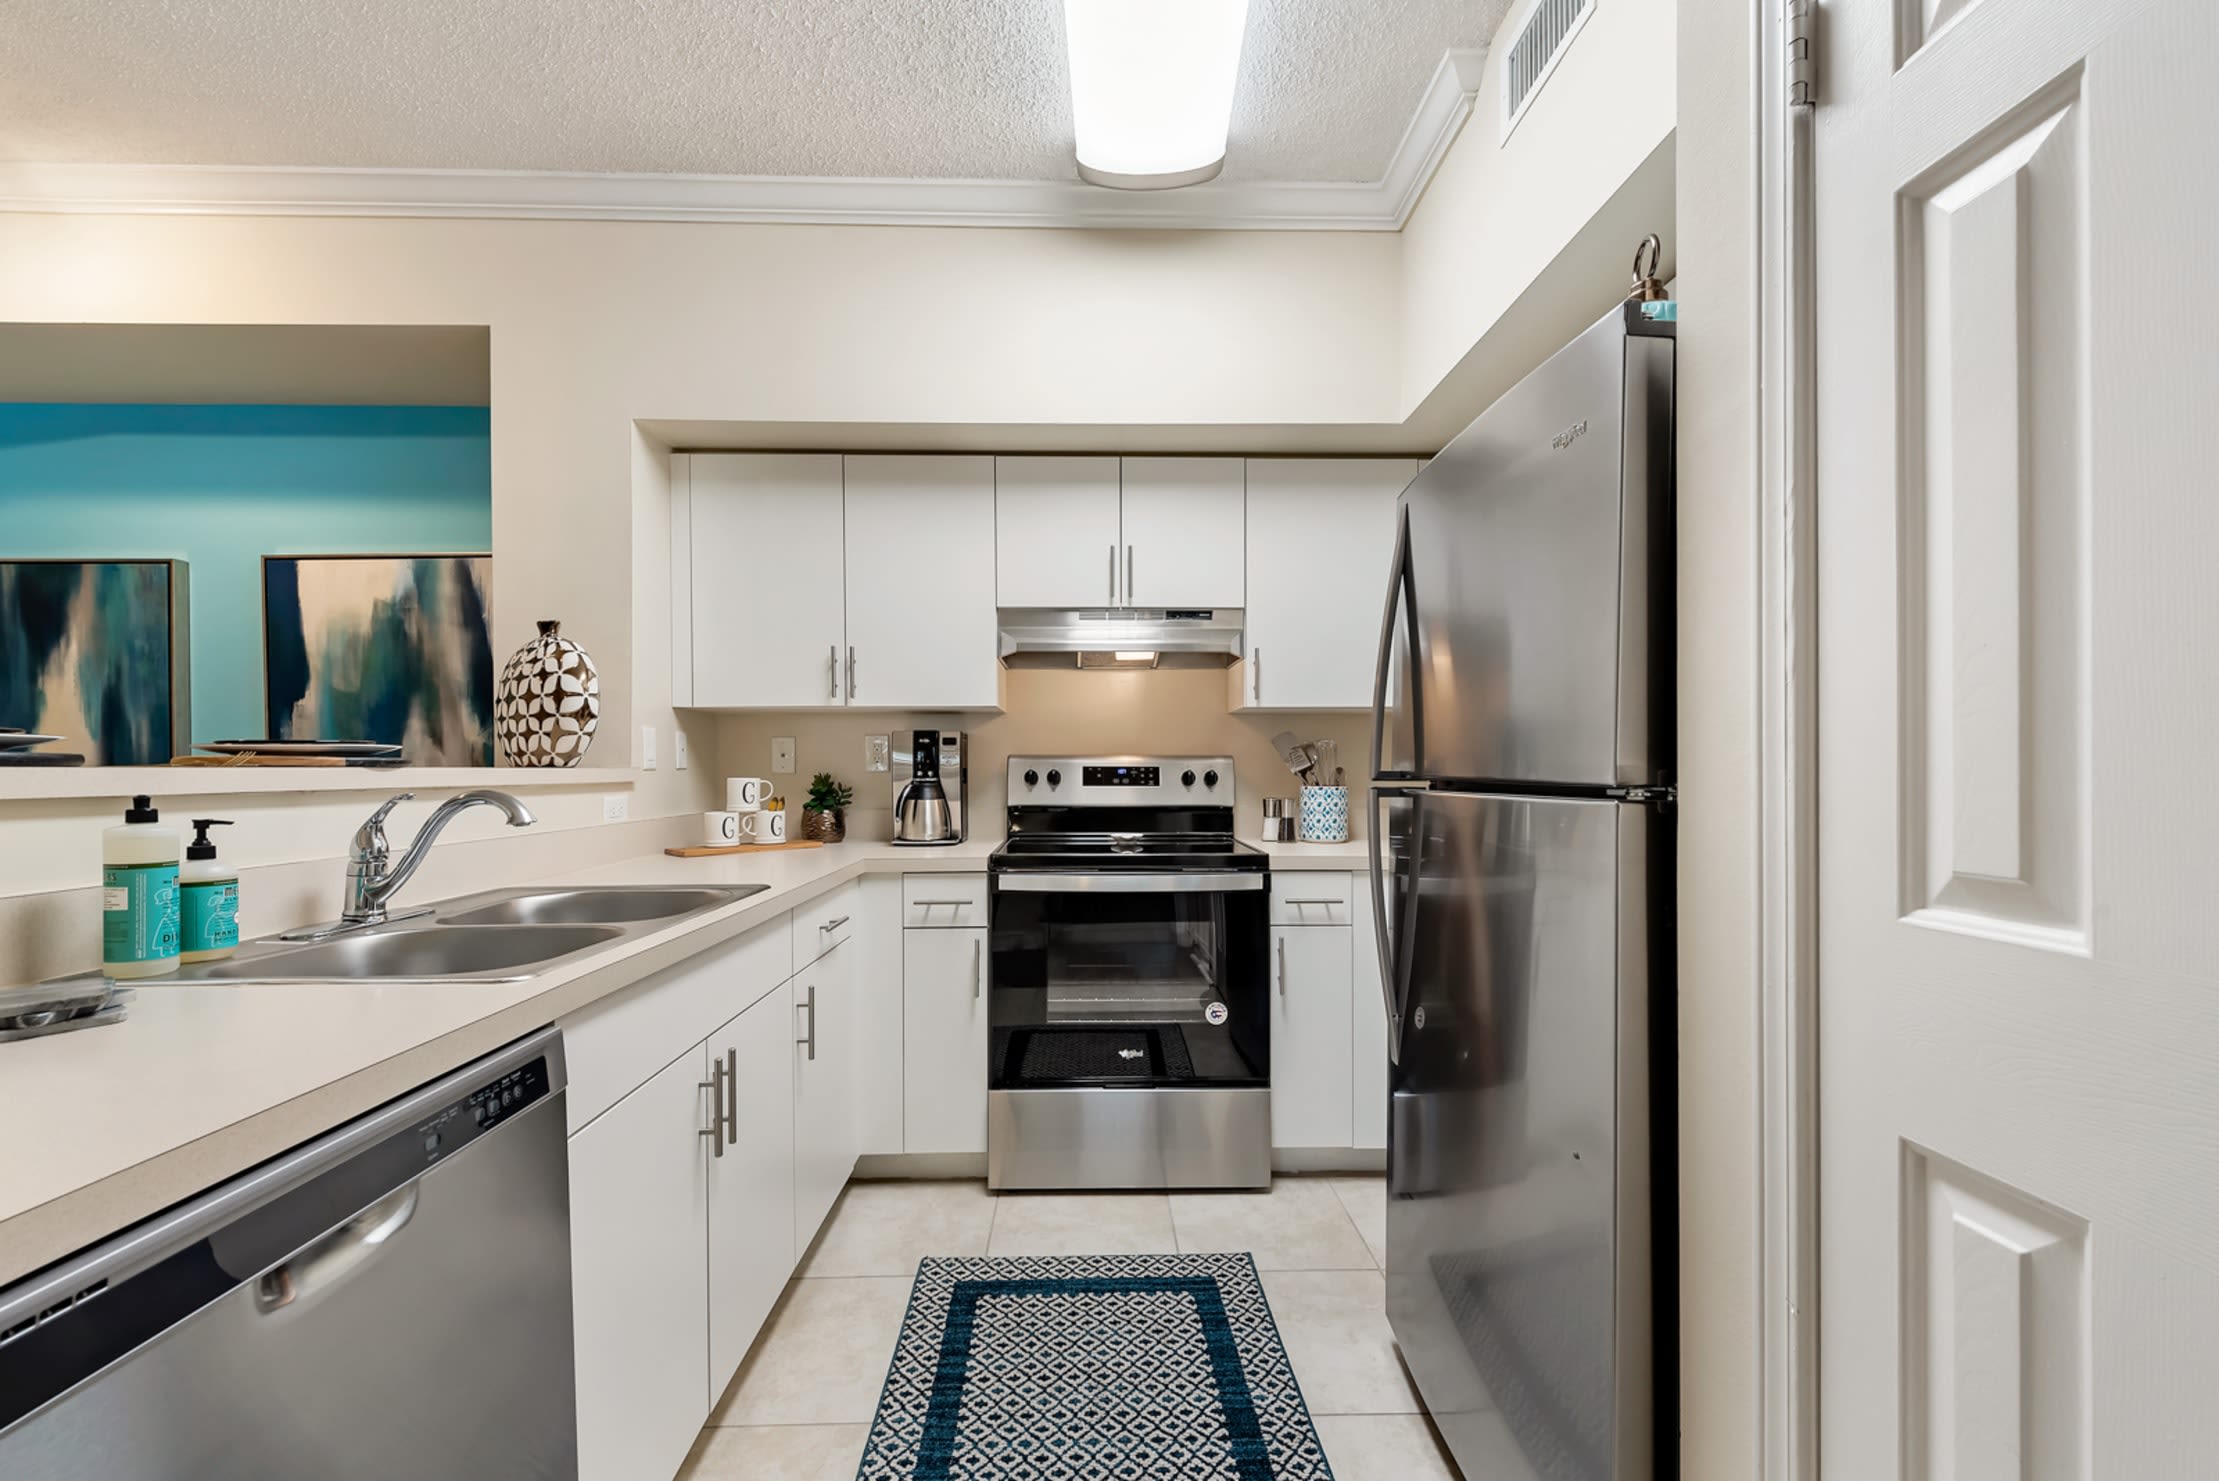 Brightly lit kitchen with stainless steel appliances, white cabinetry, and granite countertops at Fountain House Apartments in Miami Lakes, Florida